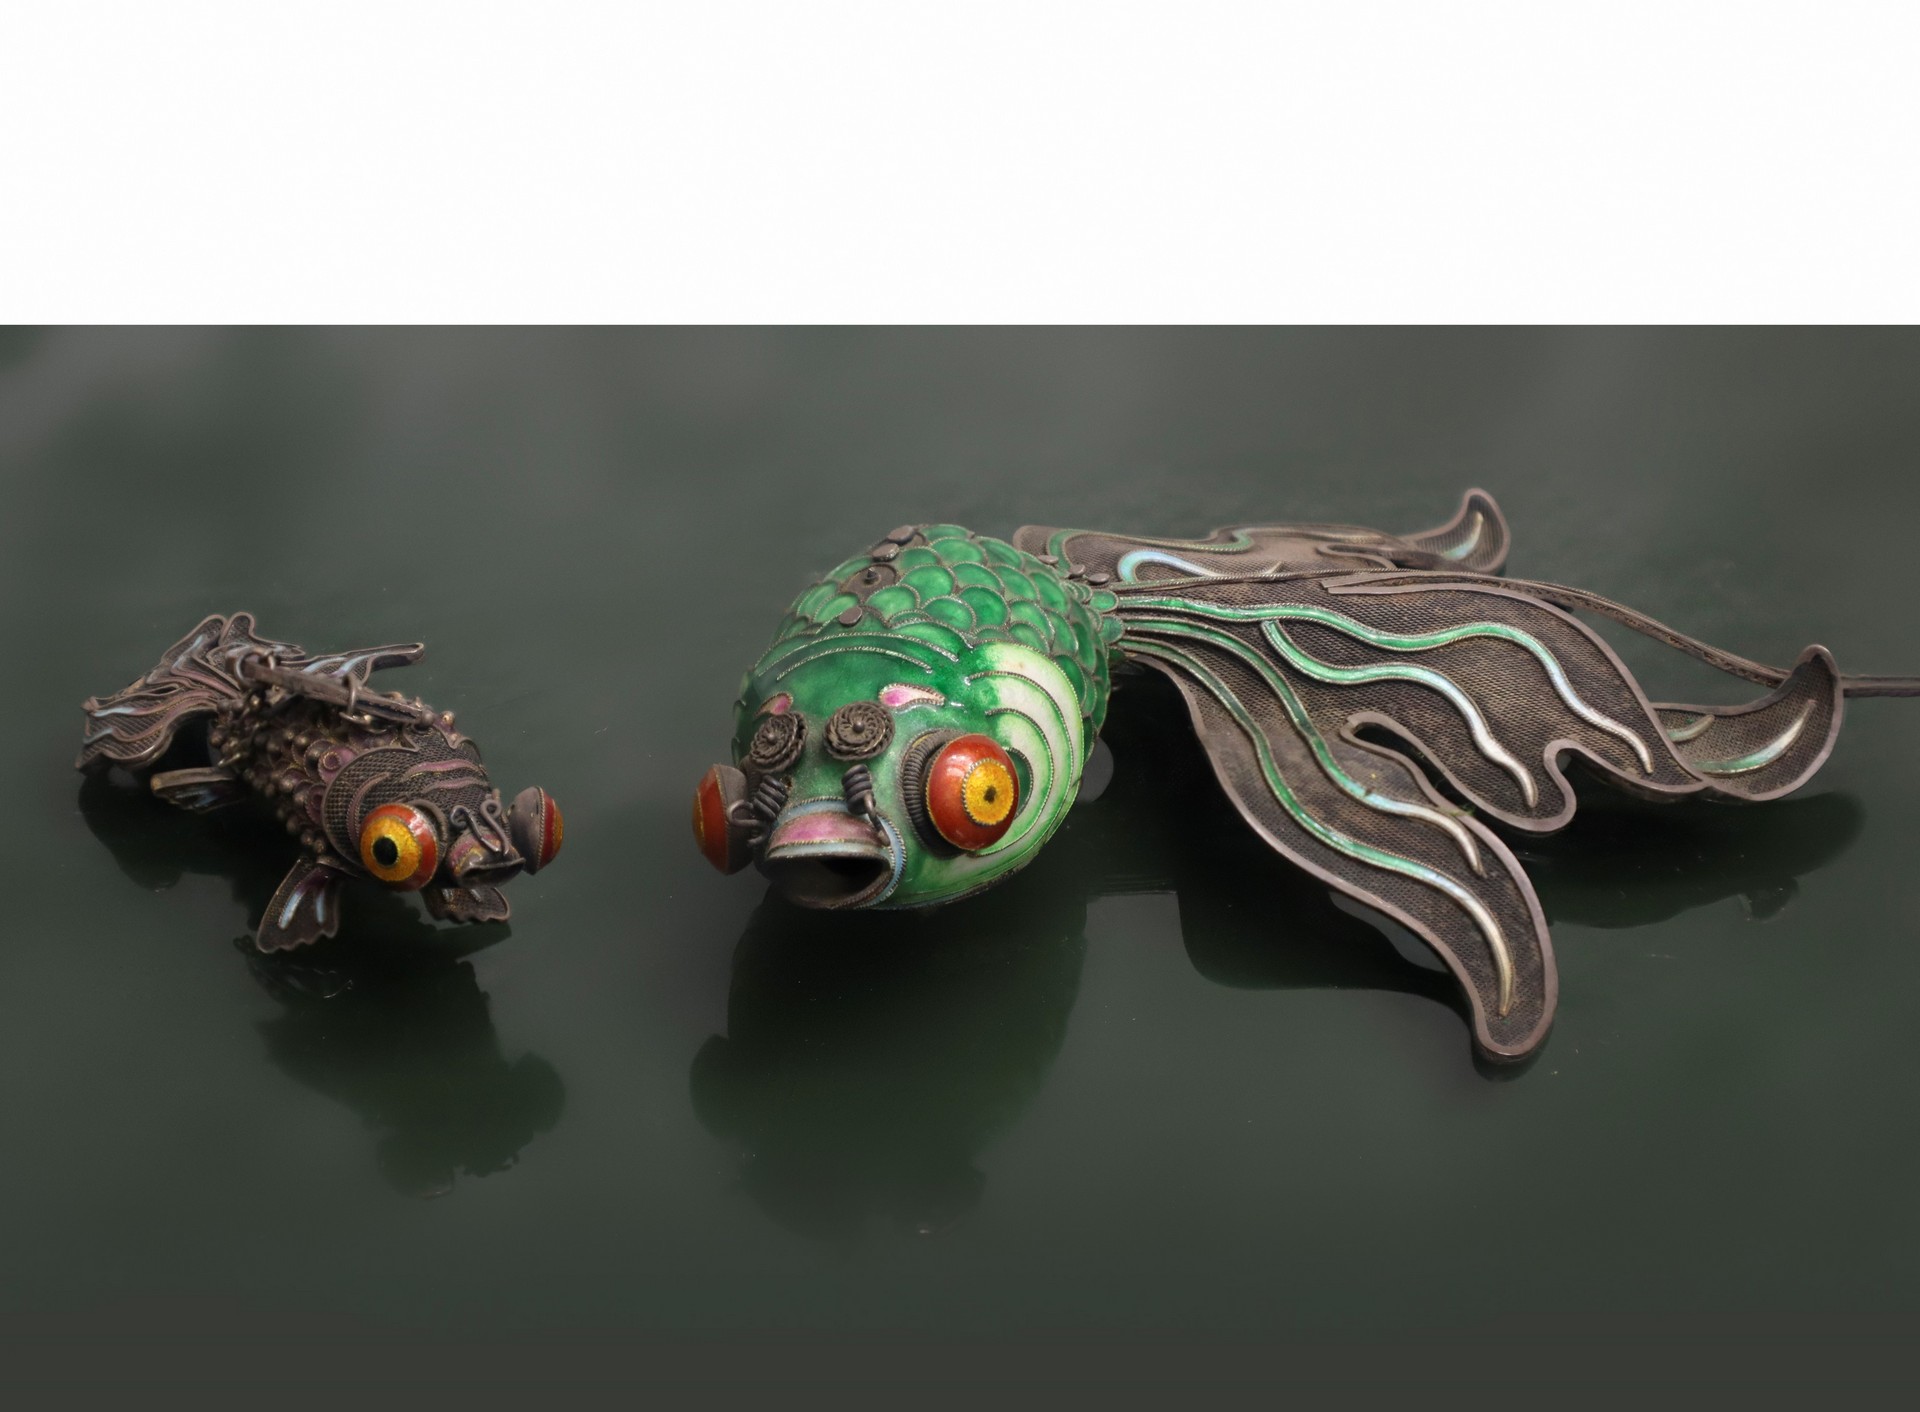 Tropical fish in cloisonné enamels and tropical fish in metal with articulated bodies, China, 20th c - Bild 2 aus 4